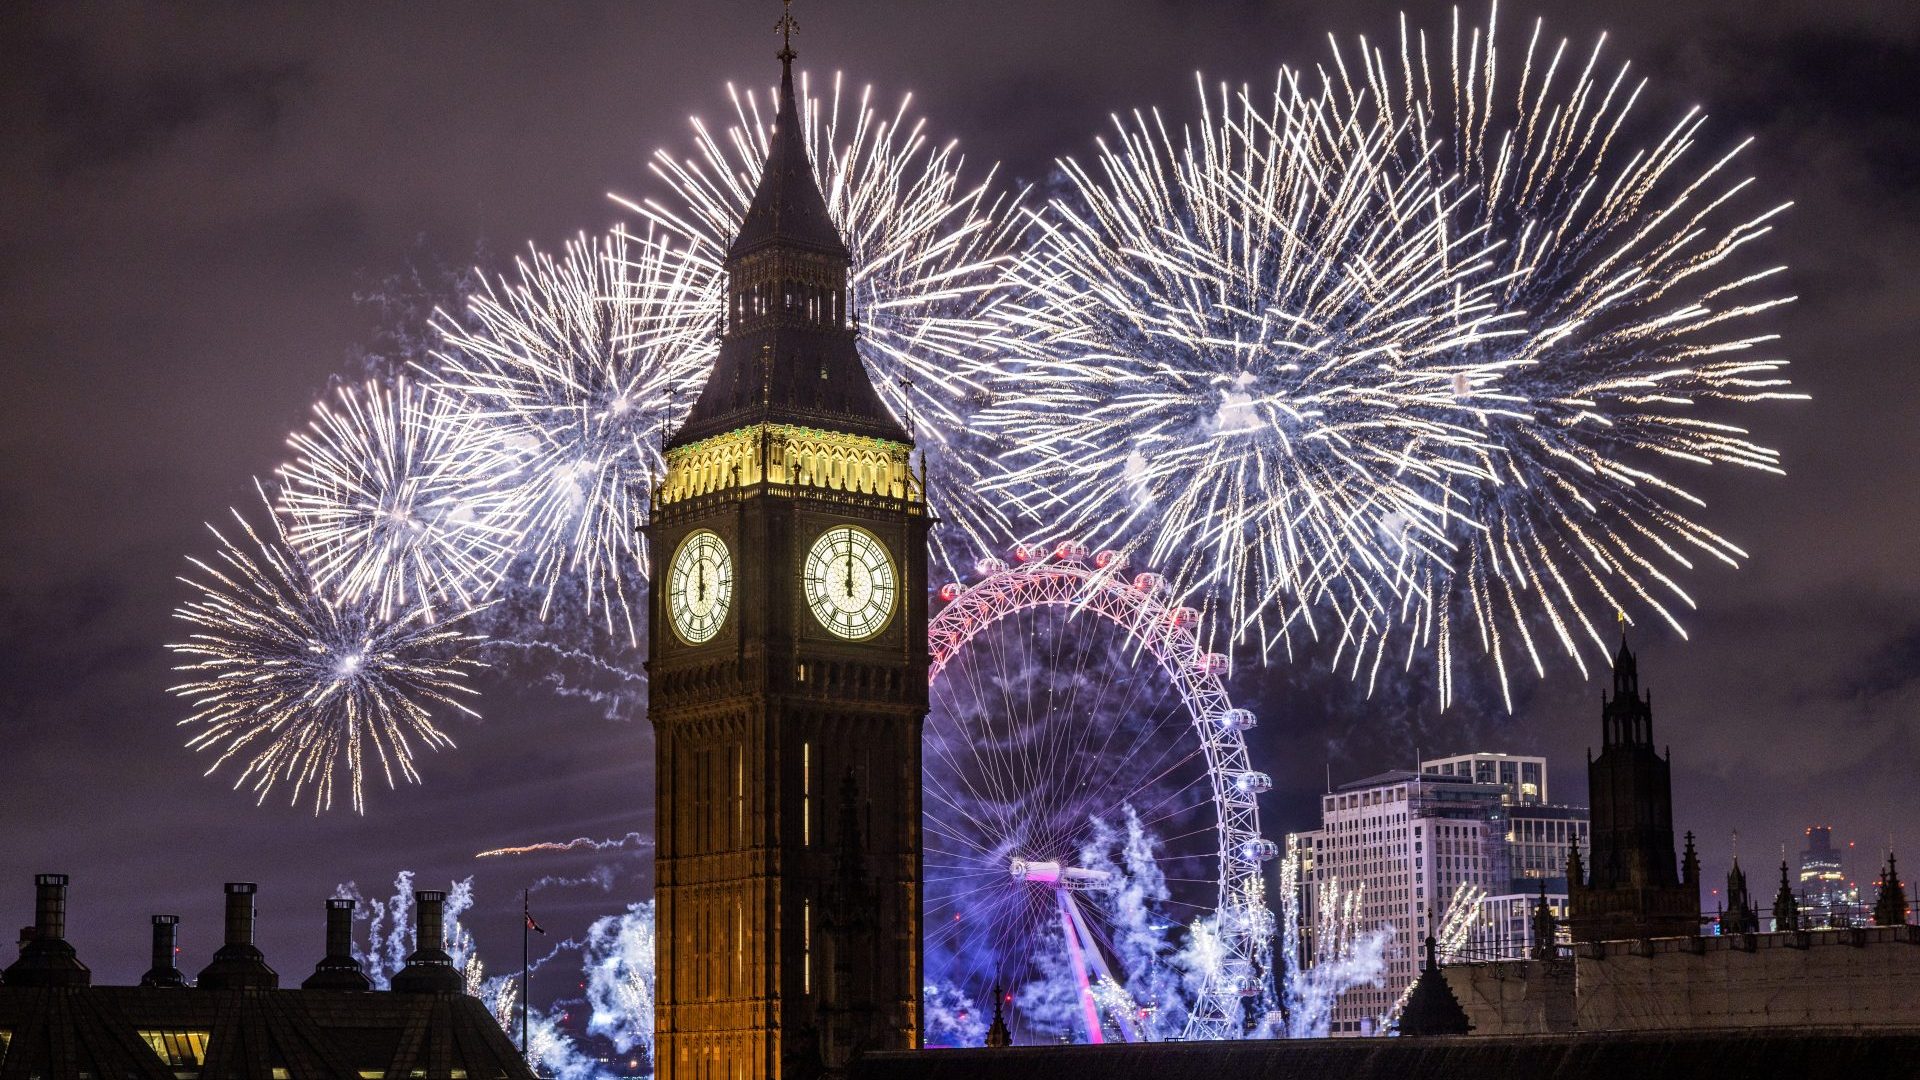 Fireworks light up the sky over Big Ben in London on January 1, 2023. Photo: Dan Kitwood/Getty